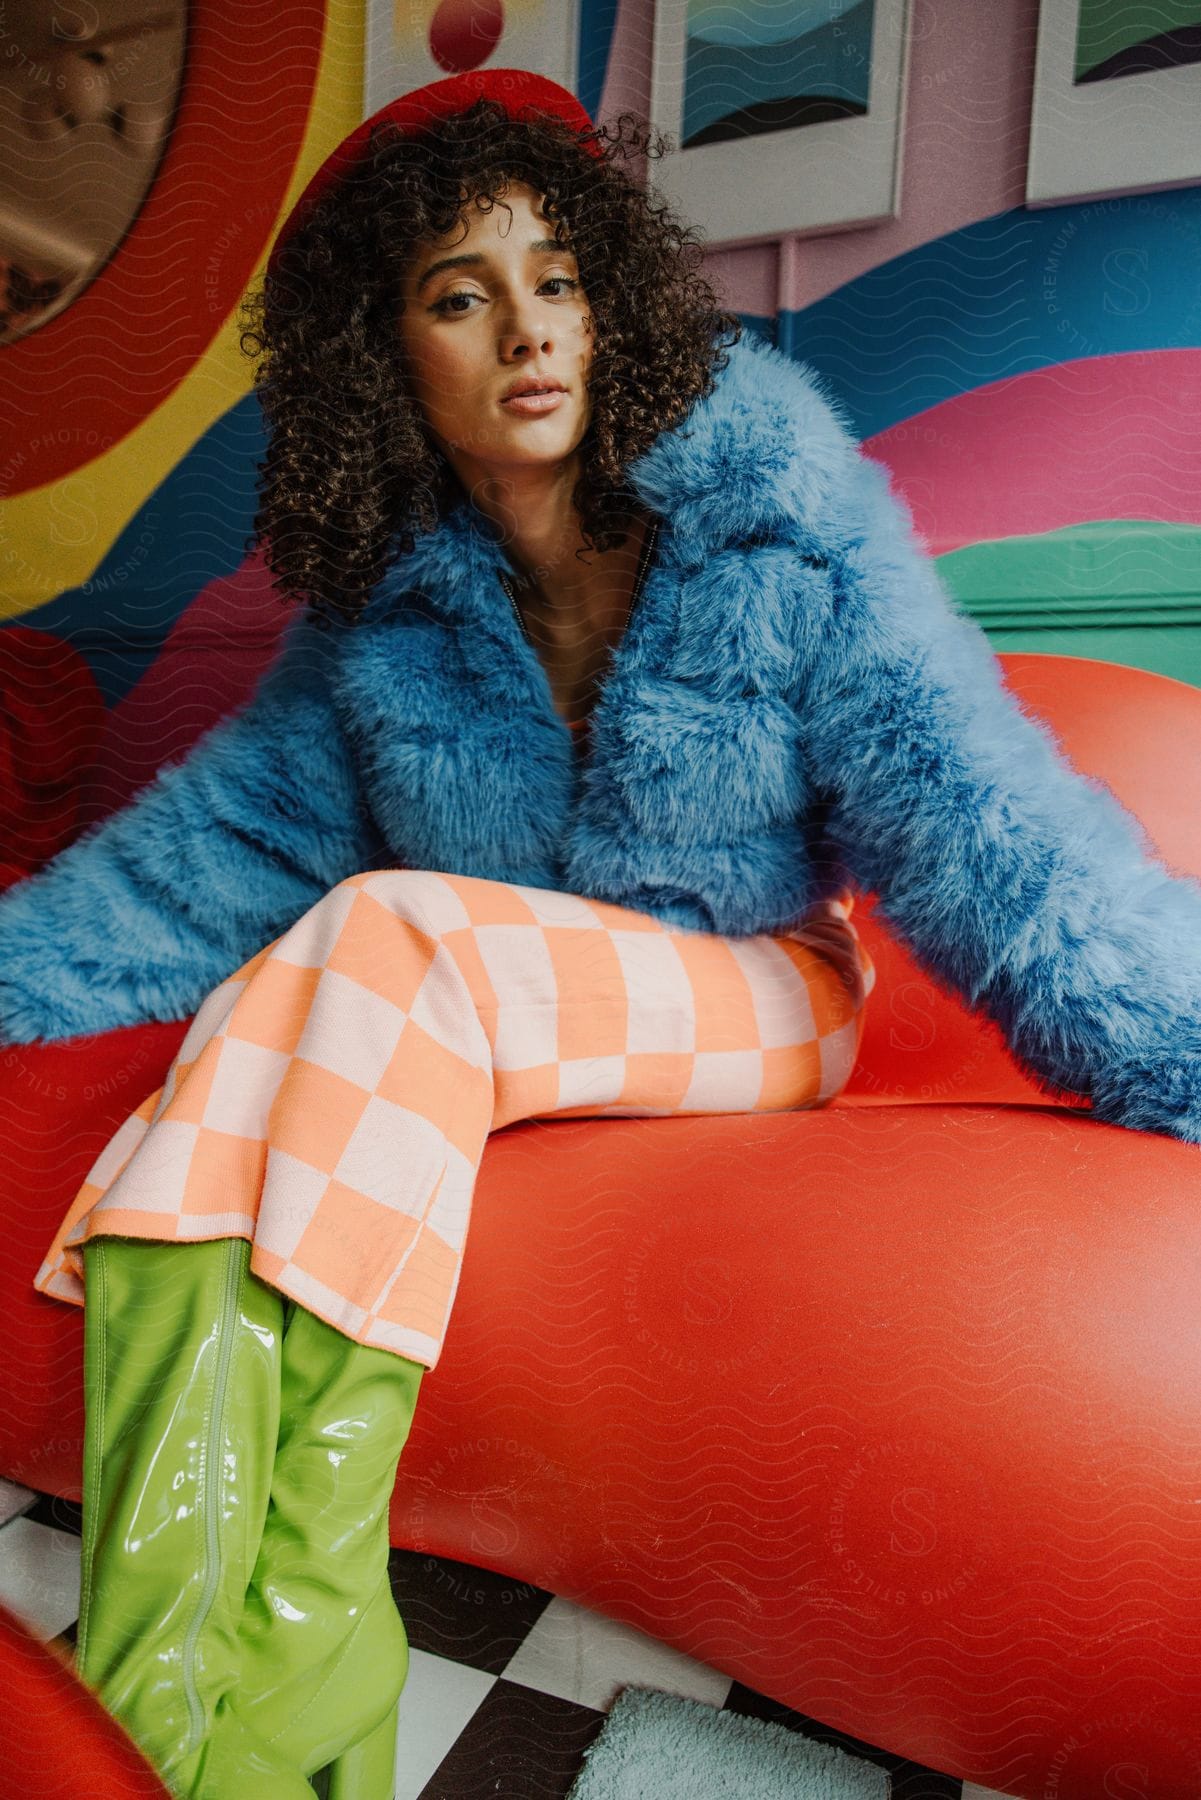 A young woman models a blue coat and green boots while sitting on a sofa.